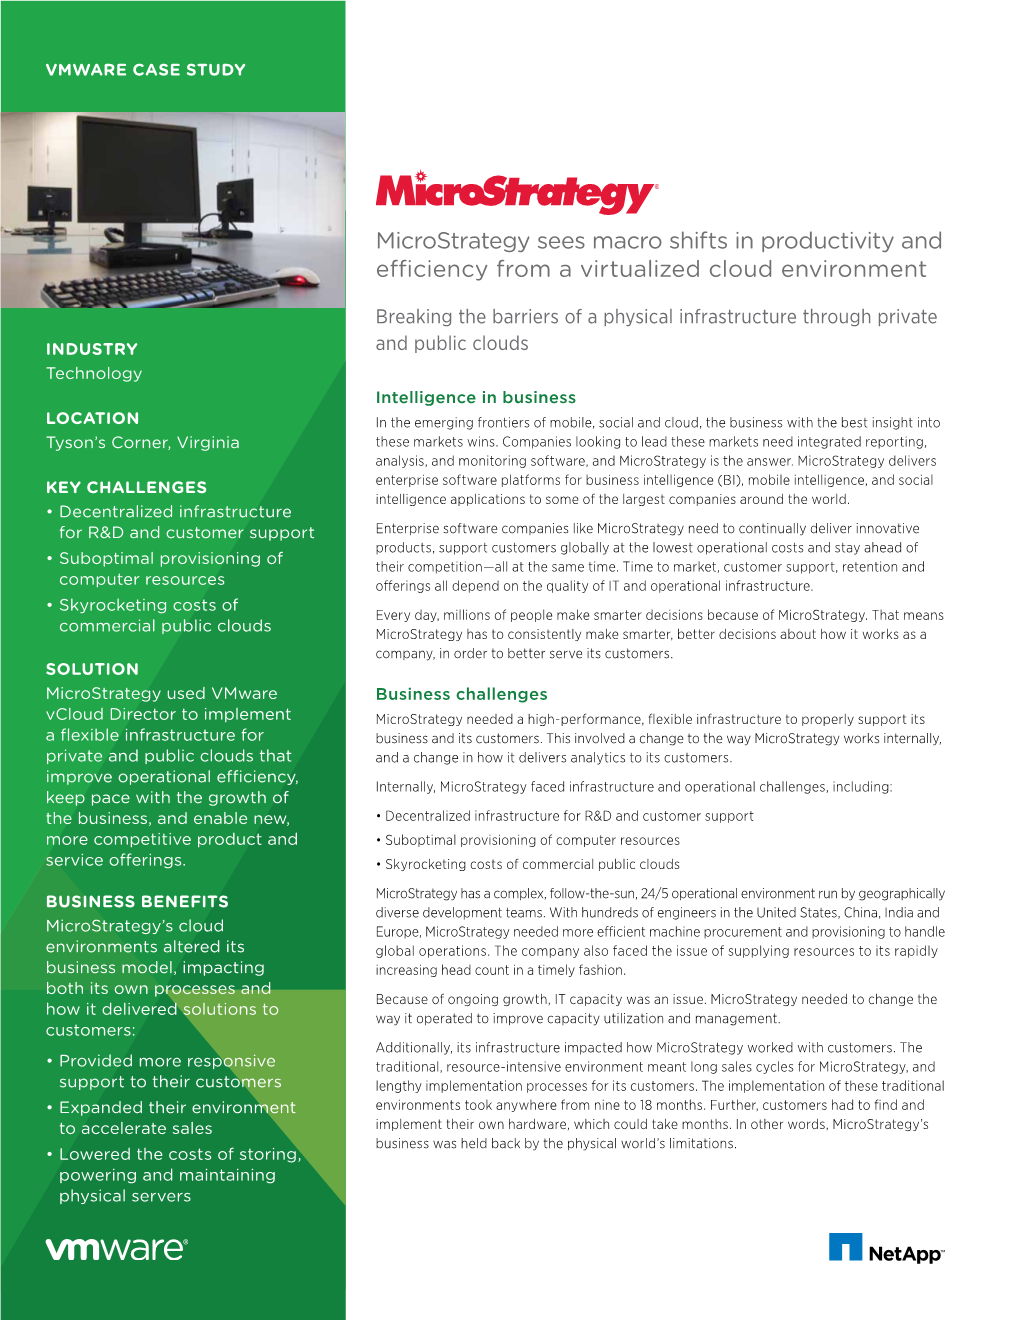 Microstrategy Sees Macro Shifts in Productivity and Efficiency from a Virtualized Cloud Environment